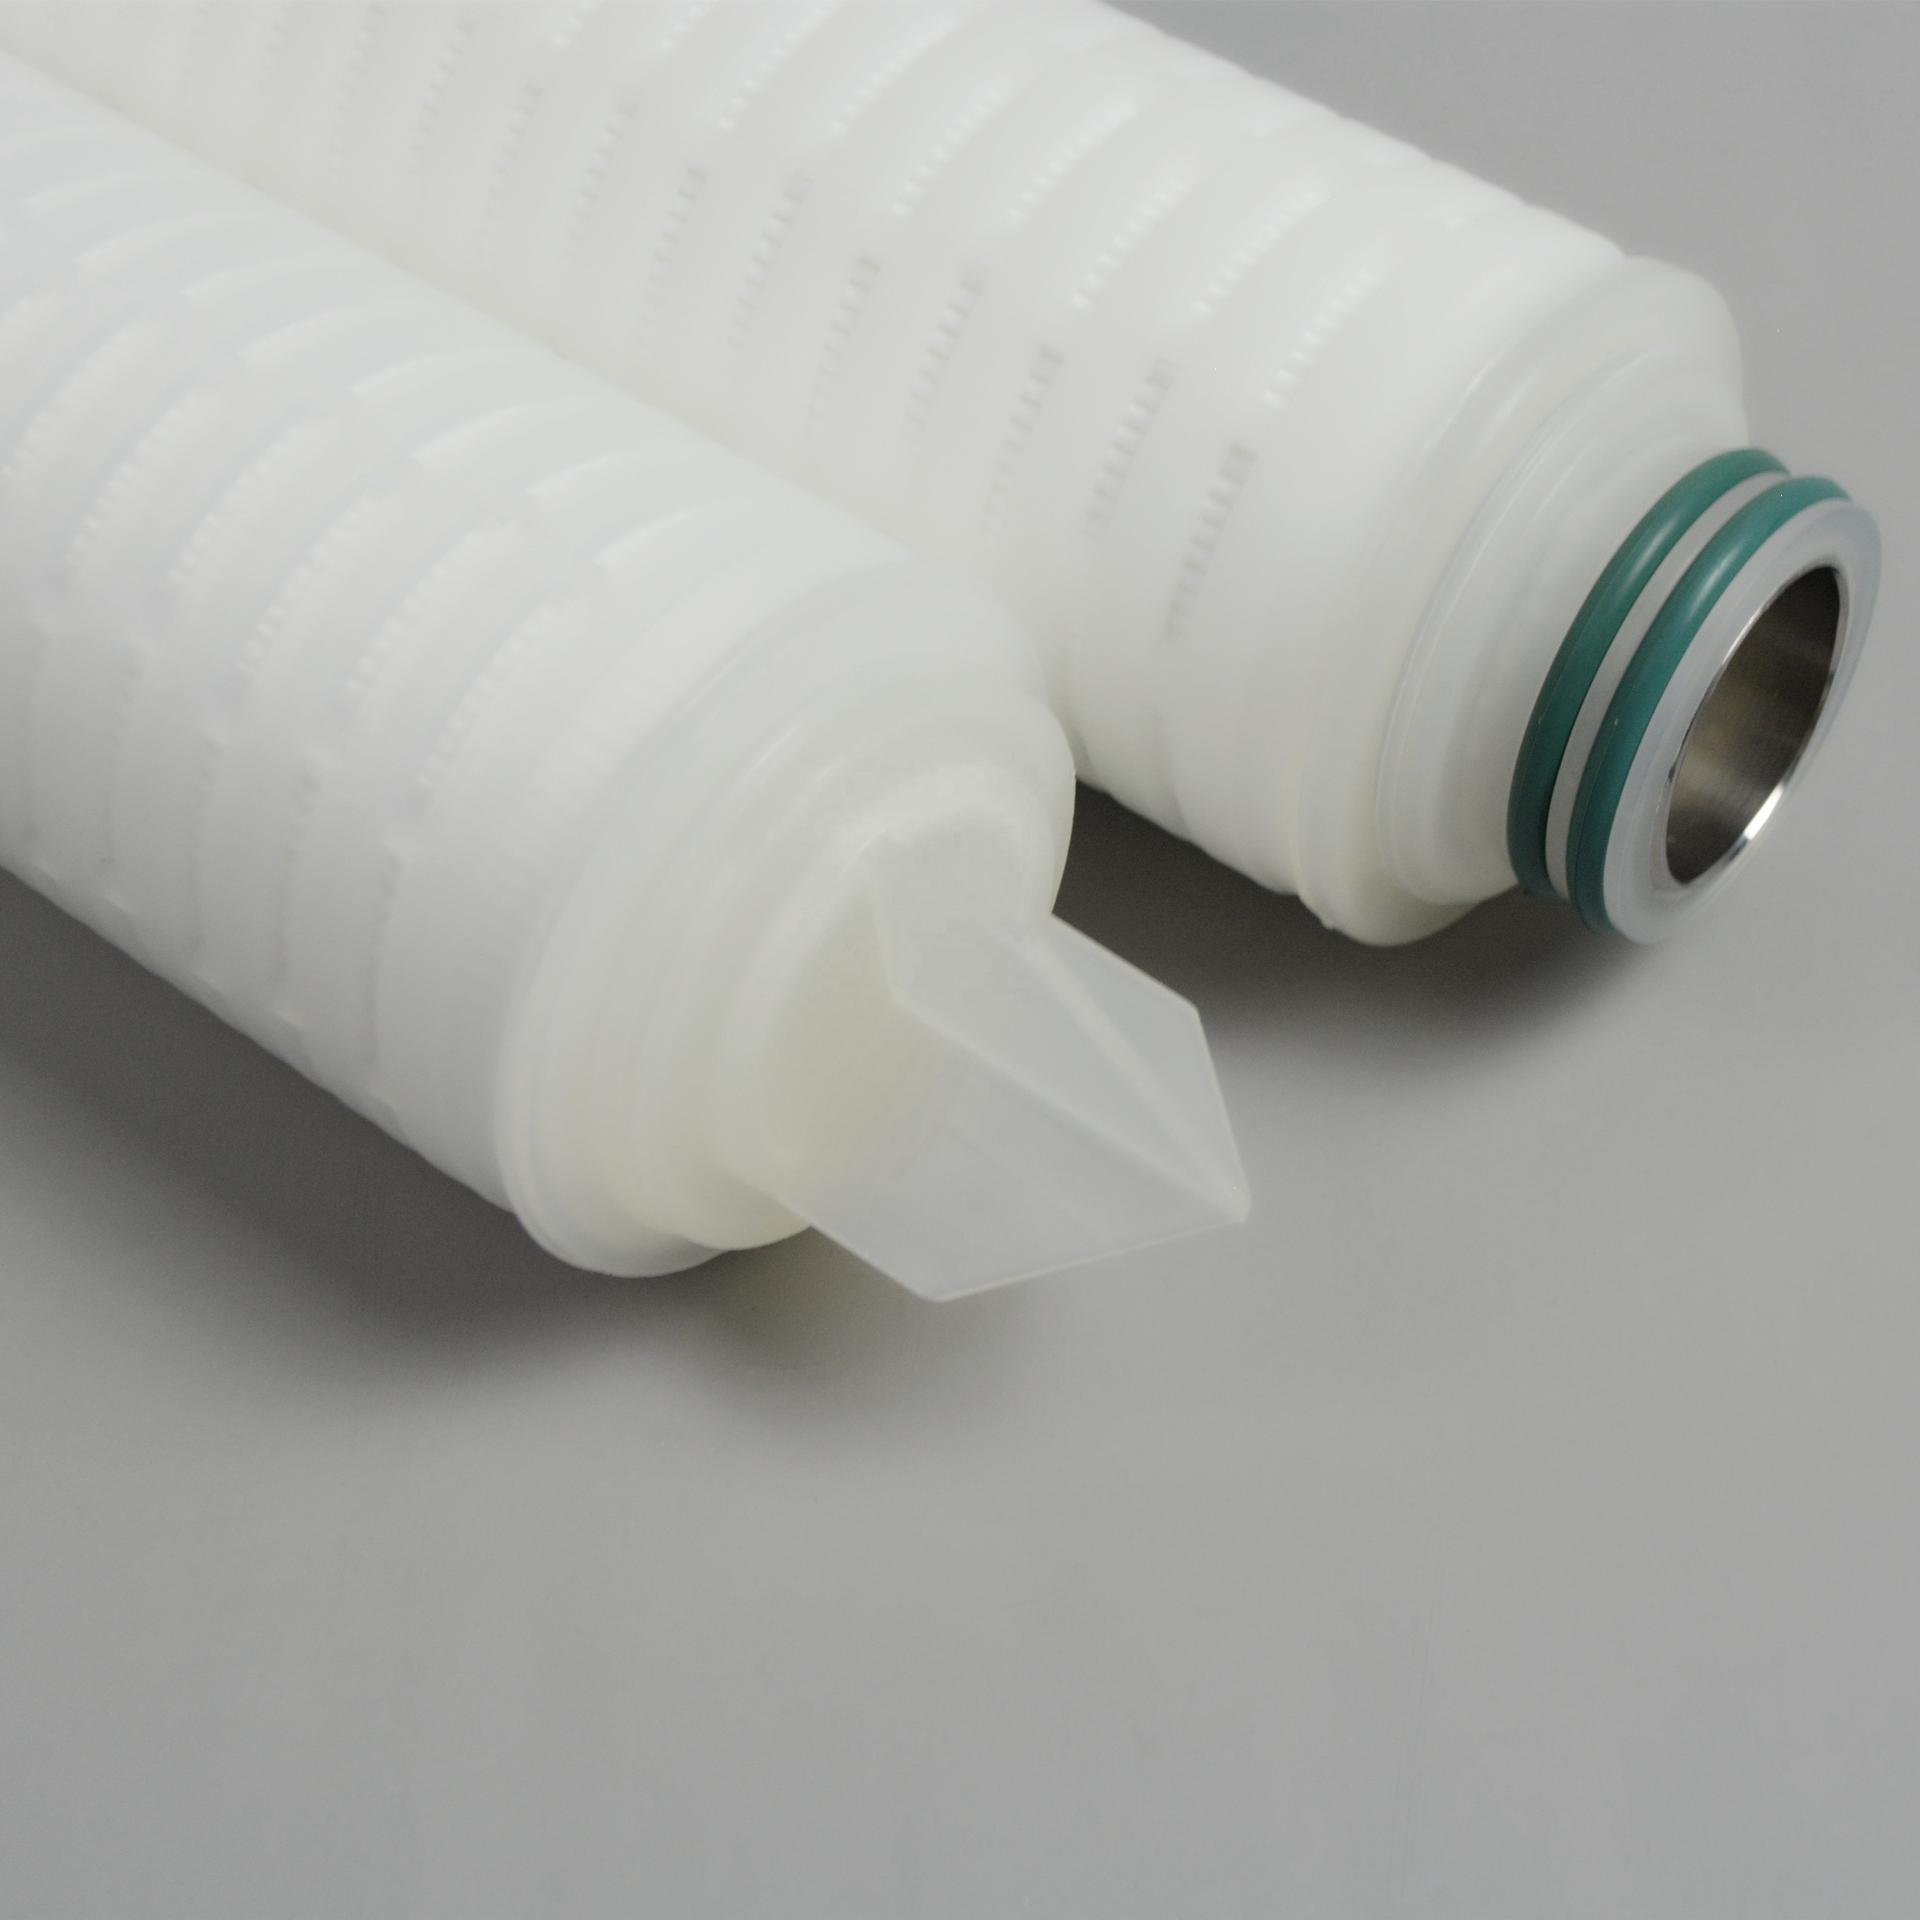 Hot sale Pleated membrane water filter/Filter Cartridge 10 20 30 40 inchfor water